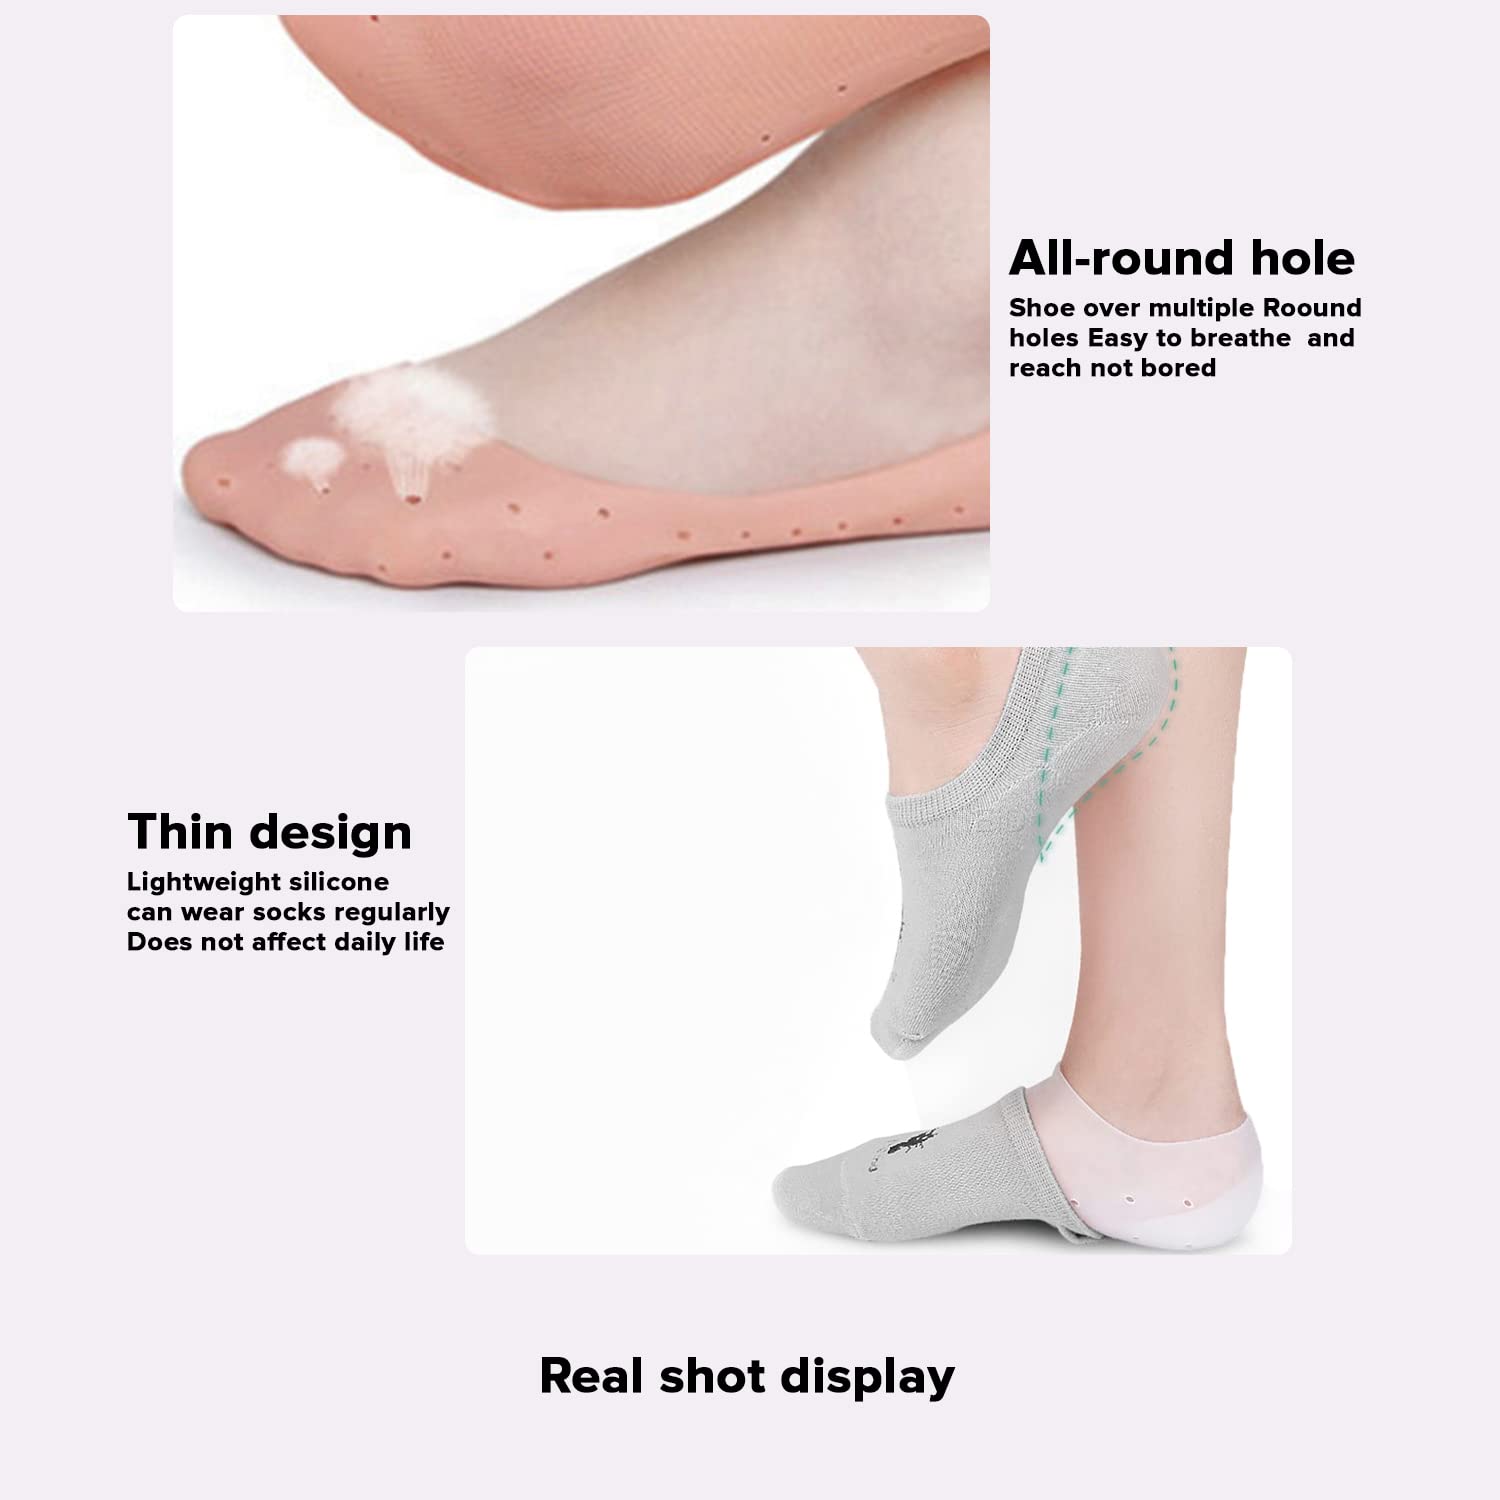 Dr Foot Silicone Moisturizing Heel Socks | For Dry, Cracked Heels, Rough Skin, Dead Skin, Calluses Remover | For Both Men & Women | Full Length, Small Size – 1 Pair (Pack of 5)